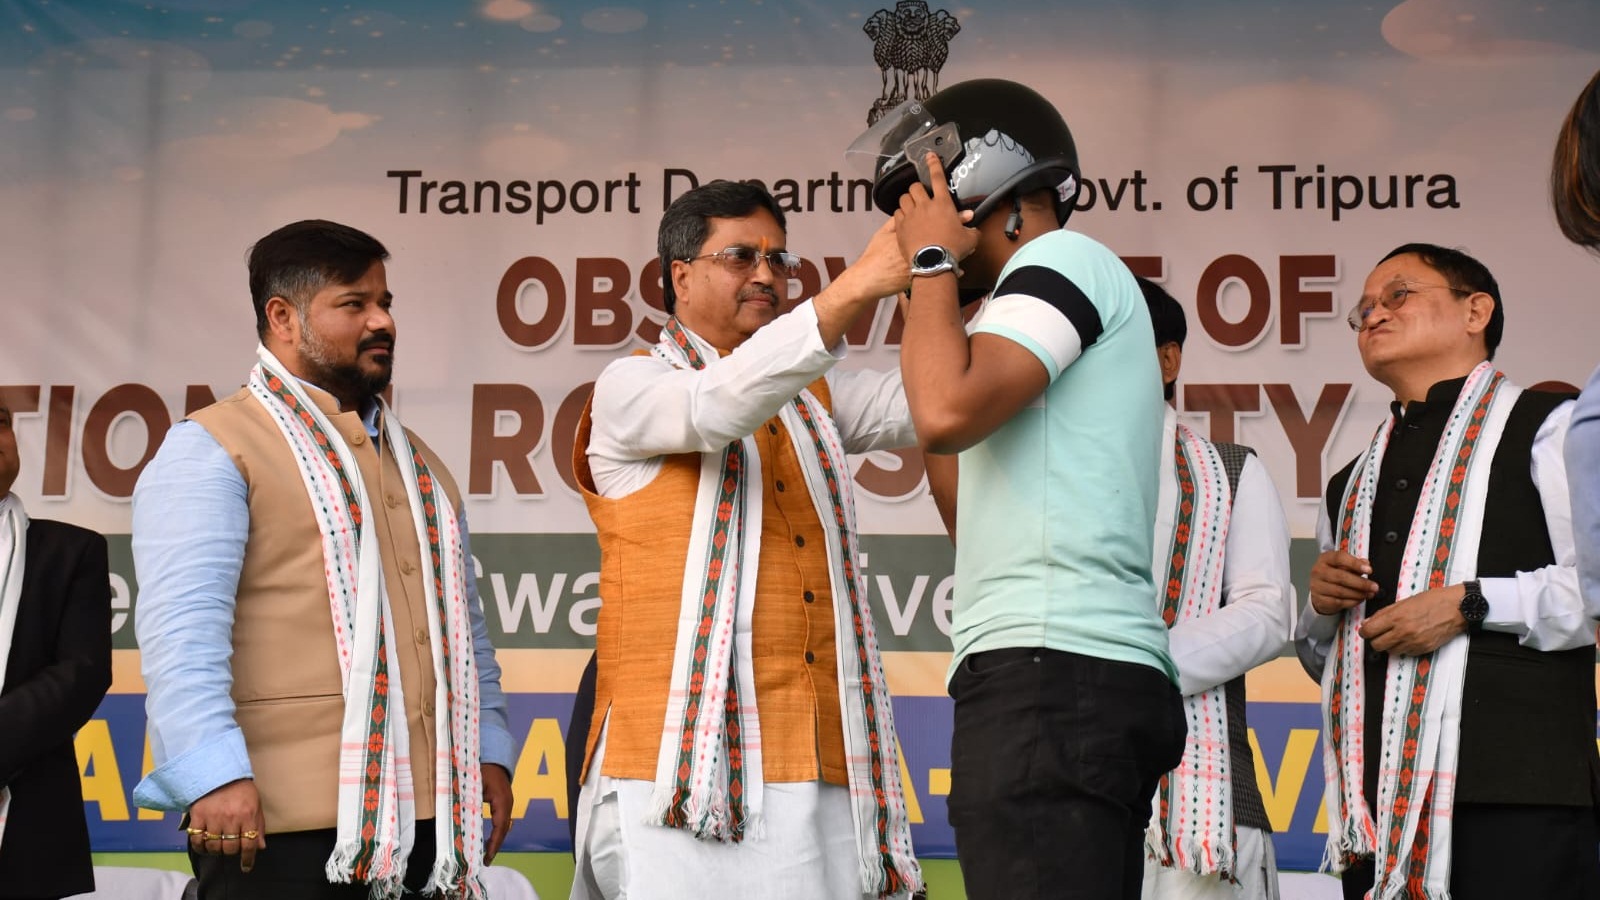 govt-using-modern-technology-to-ensure-road-safety-says-tripura-chief-minister